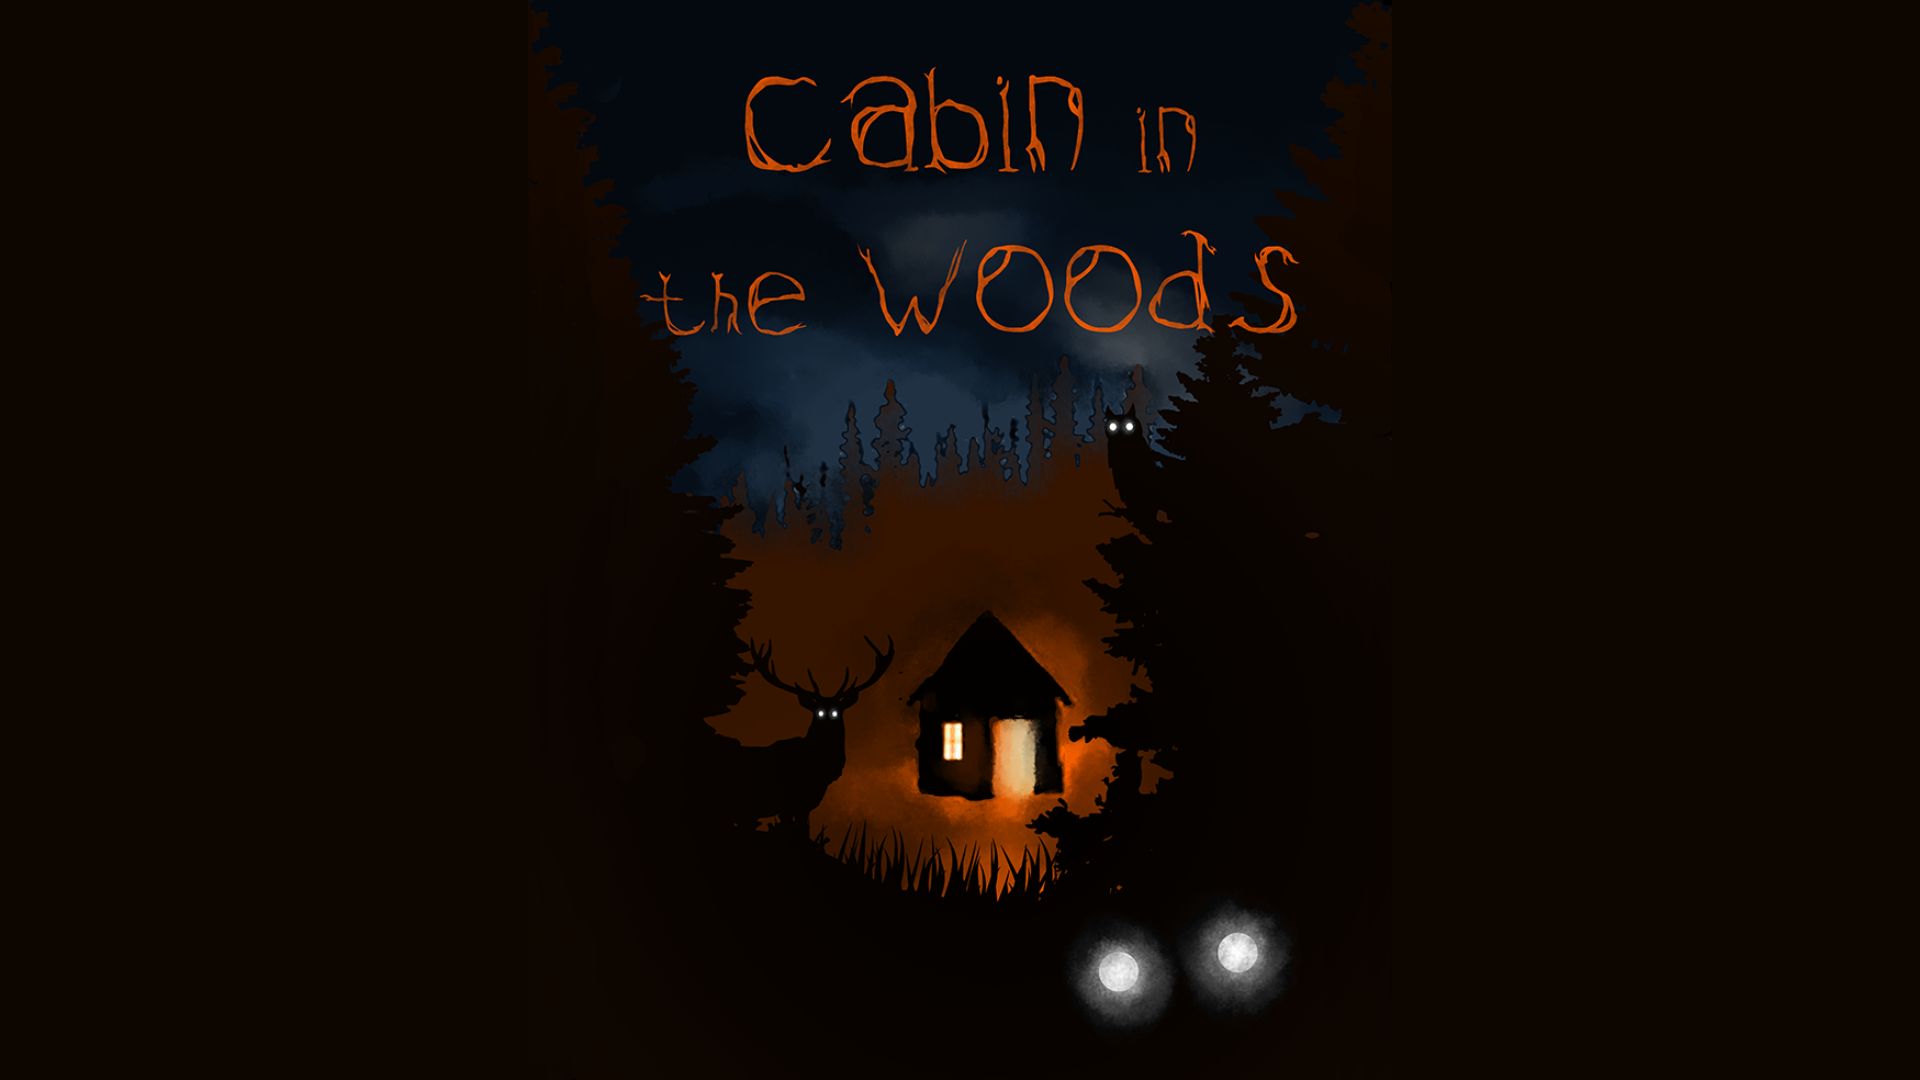 4 persons - Cabin in the Woods